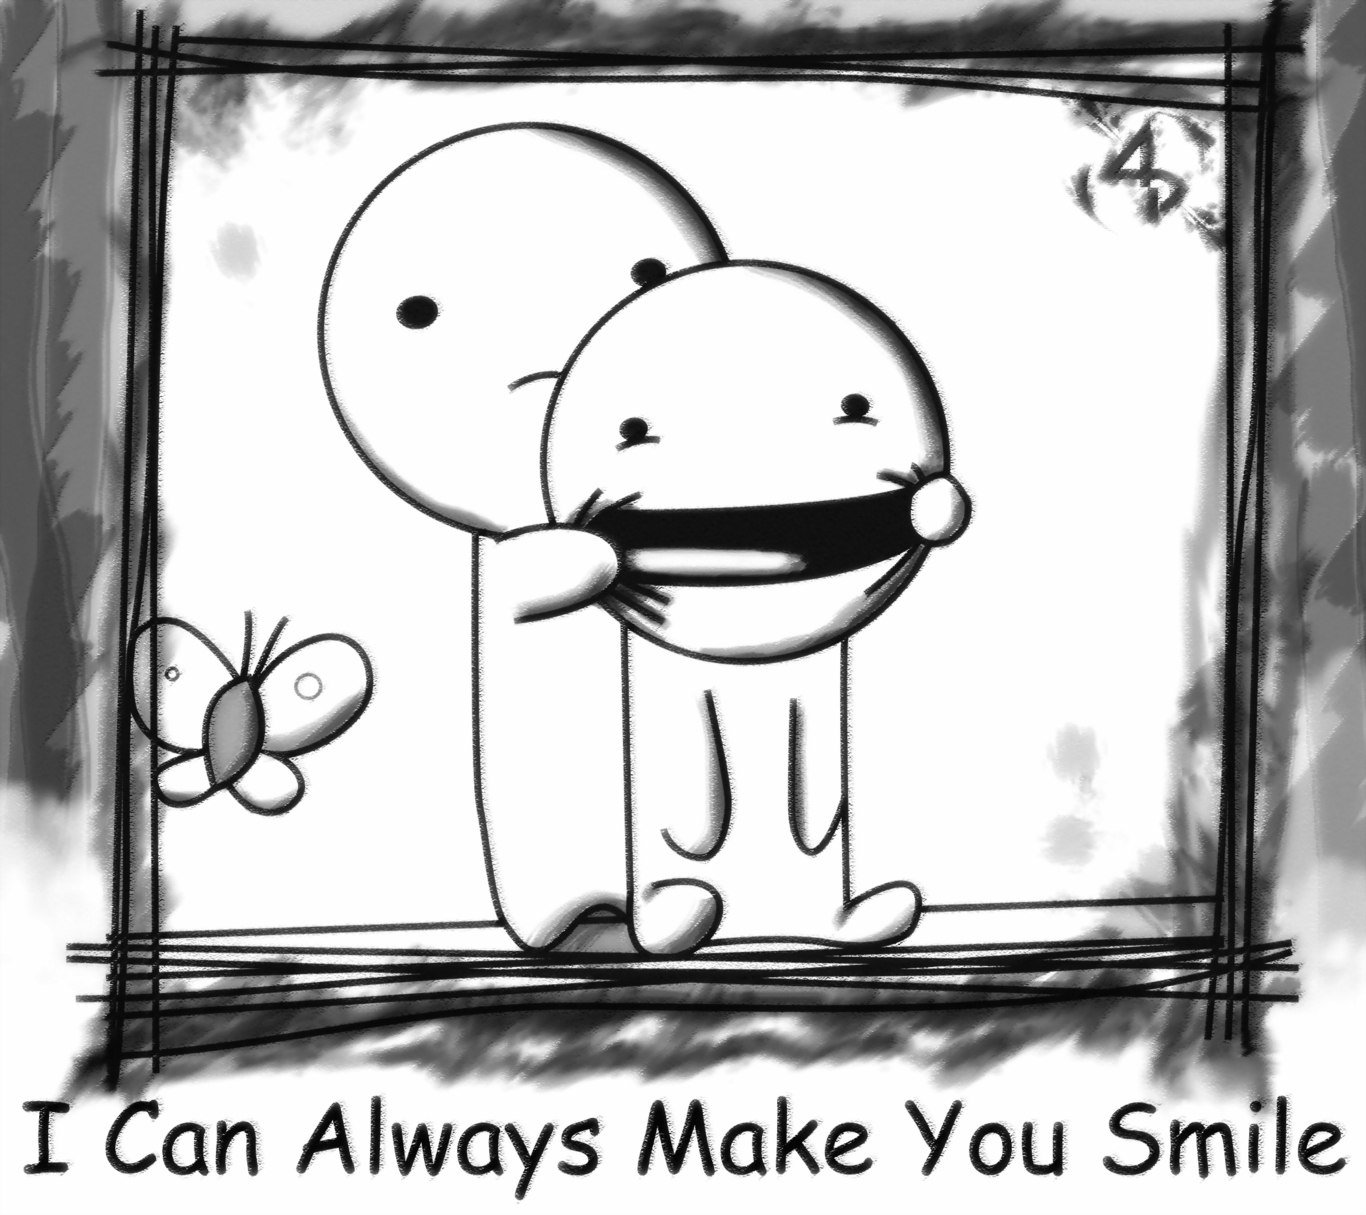 I can always make you smile картинка